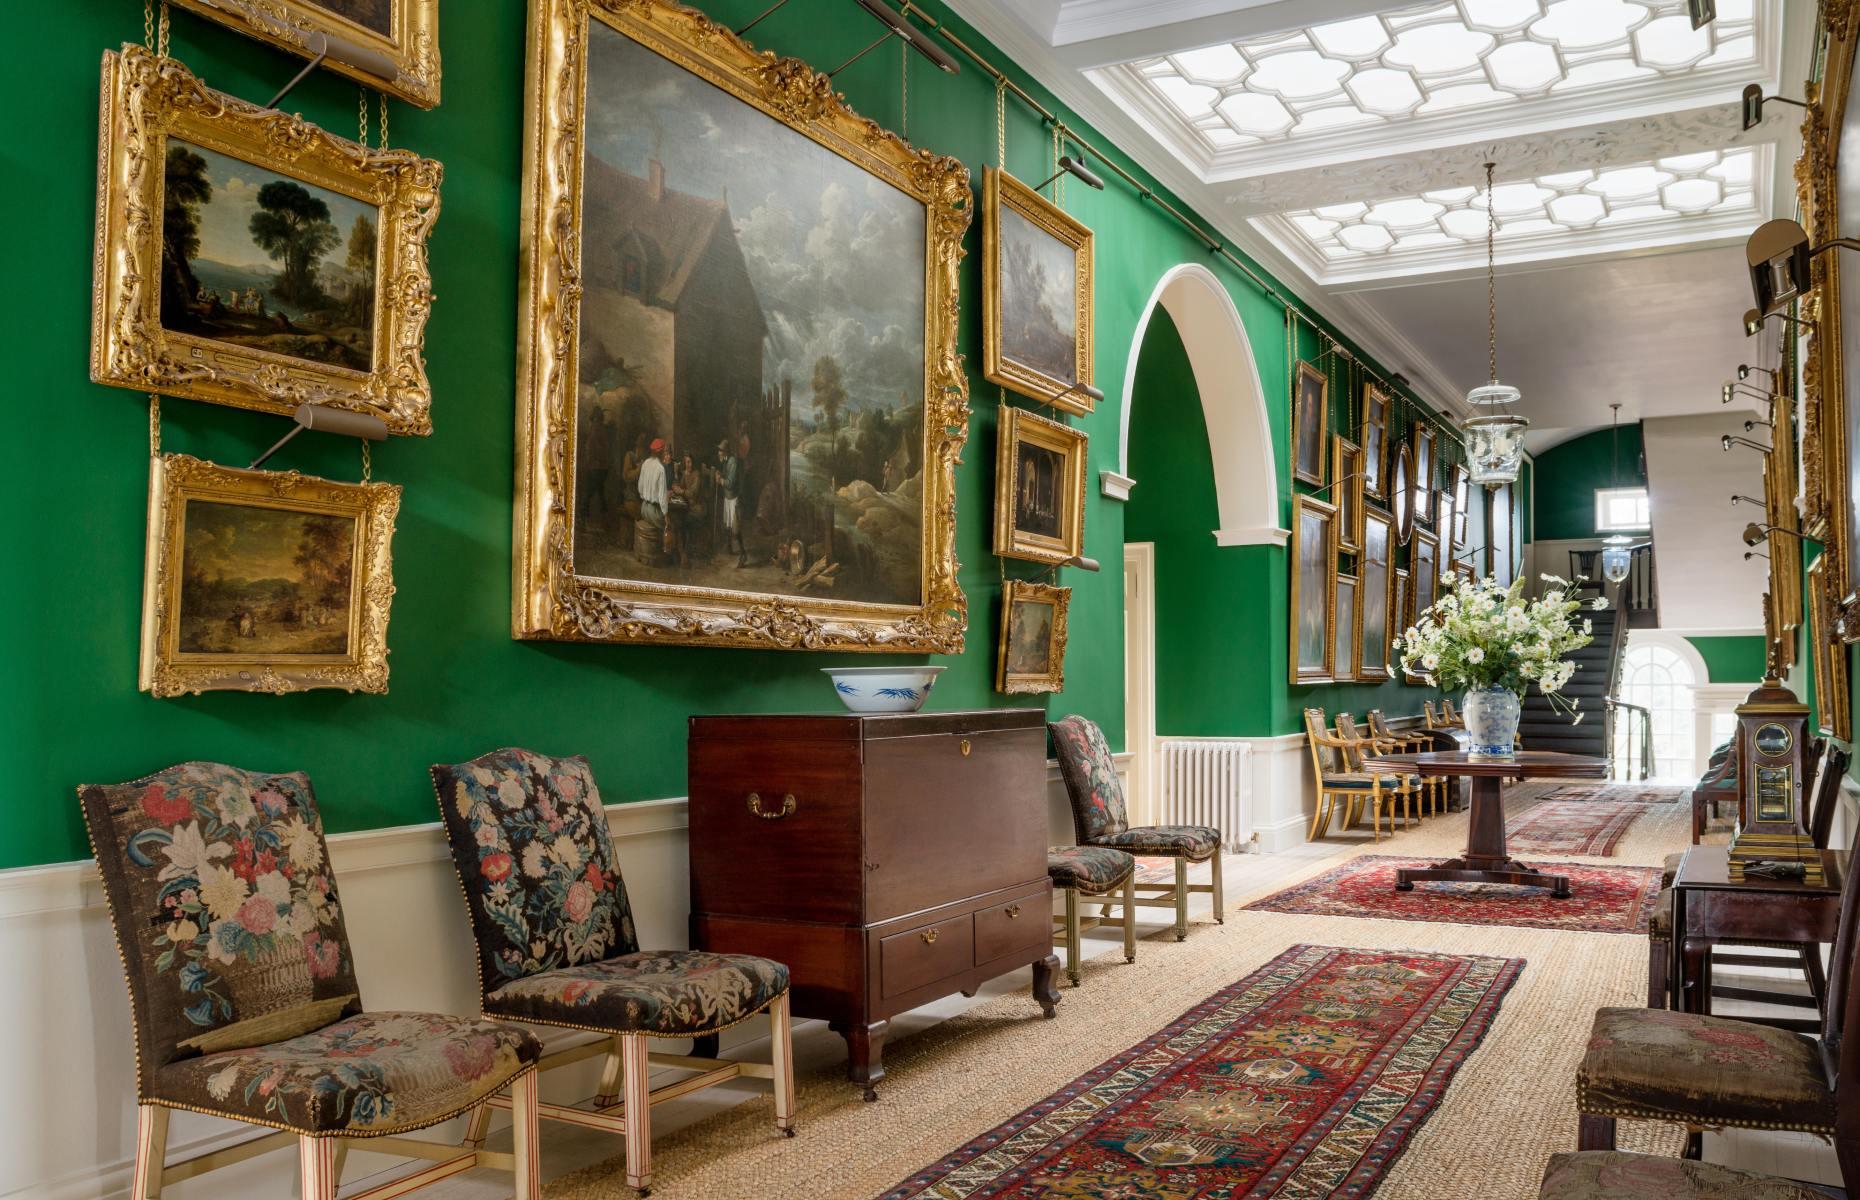 <p>After a painstaking restoration, it opened to the public in 2008 and features some stunning rooms including the Picture Gallery on the first floor with its collection of paintings by Scottish artists and some beautifully carved chairs by Thomas Chippendale and Alexander Peter lining the corridor.</p>  <p>Other highlights include the Blue Drawing Room, the Pink Dining Room, and the Tapestry Room.</p>